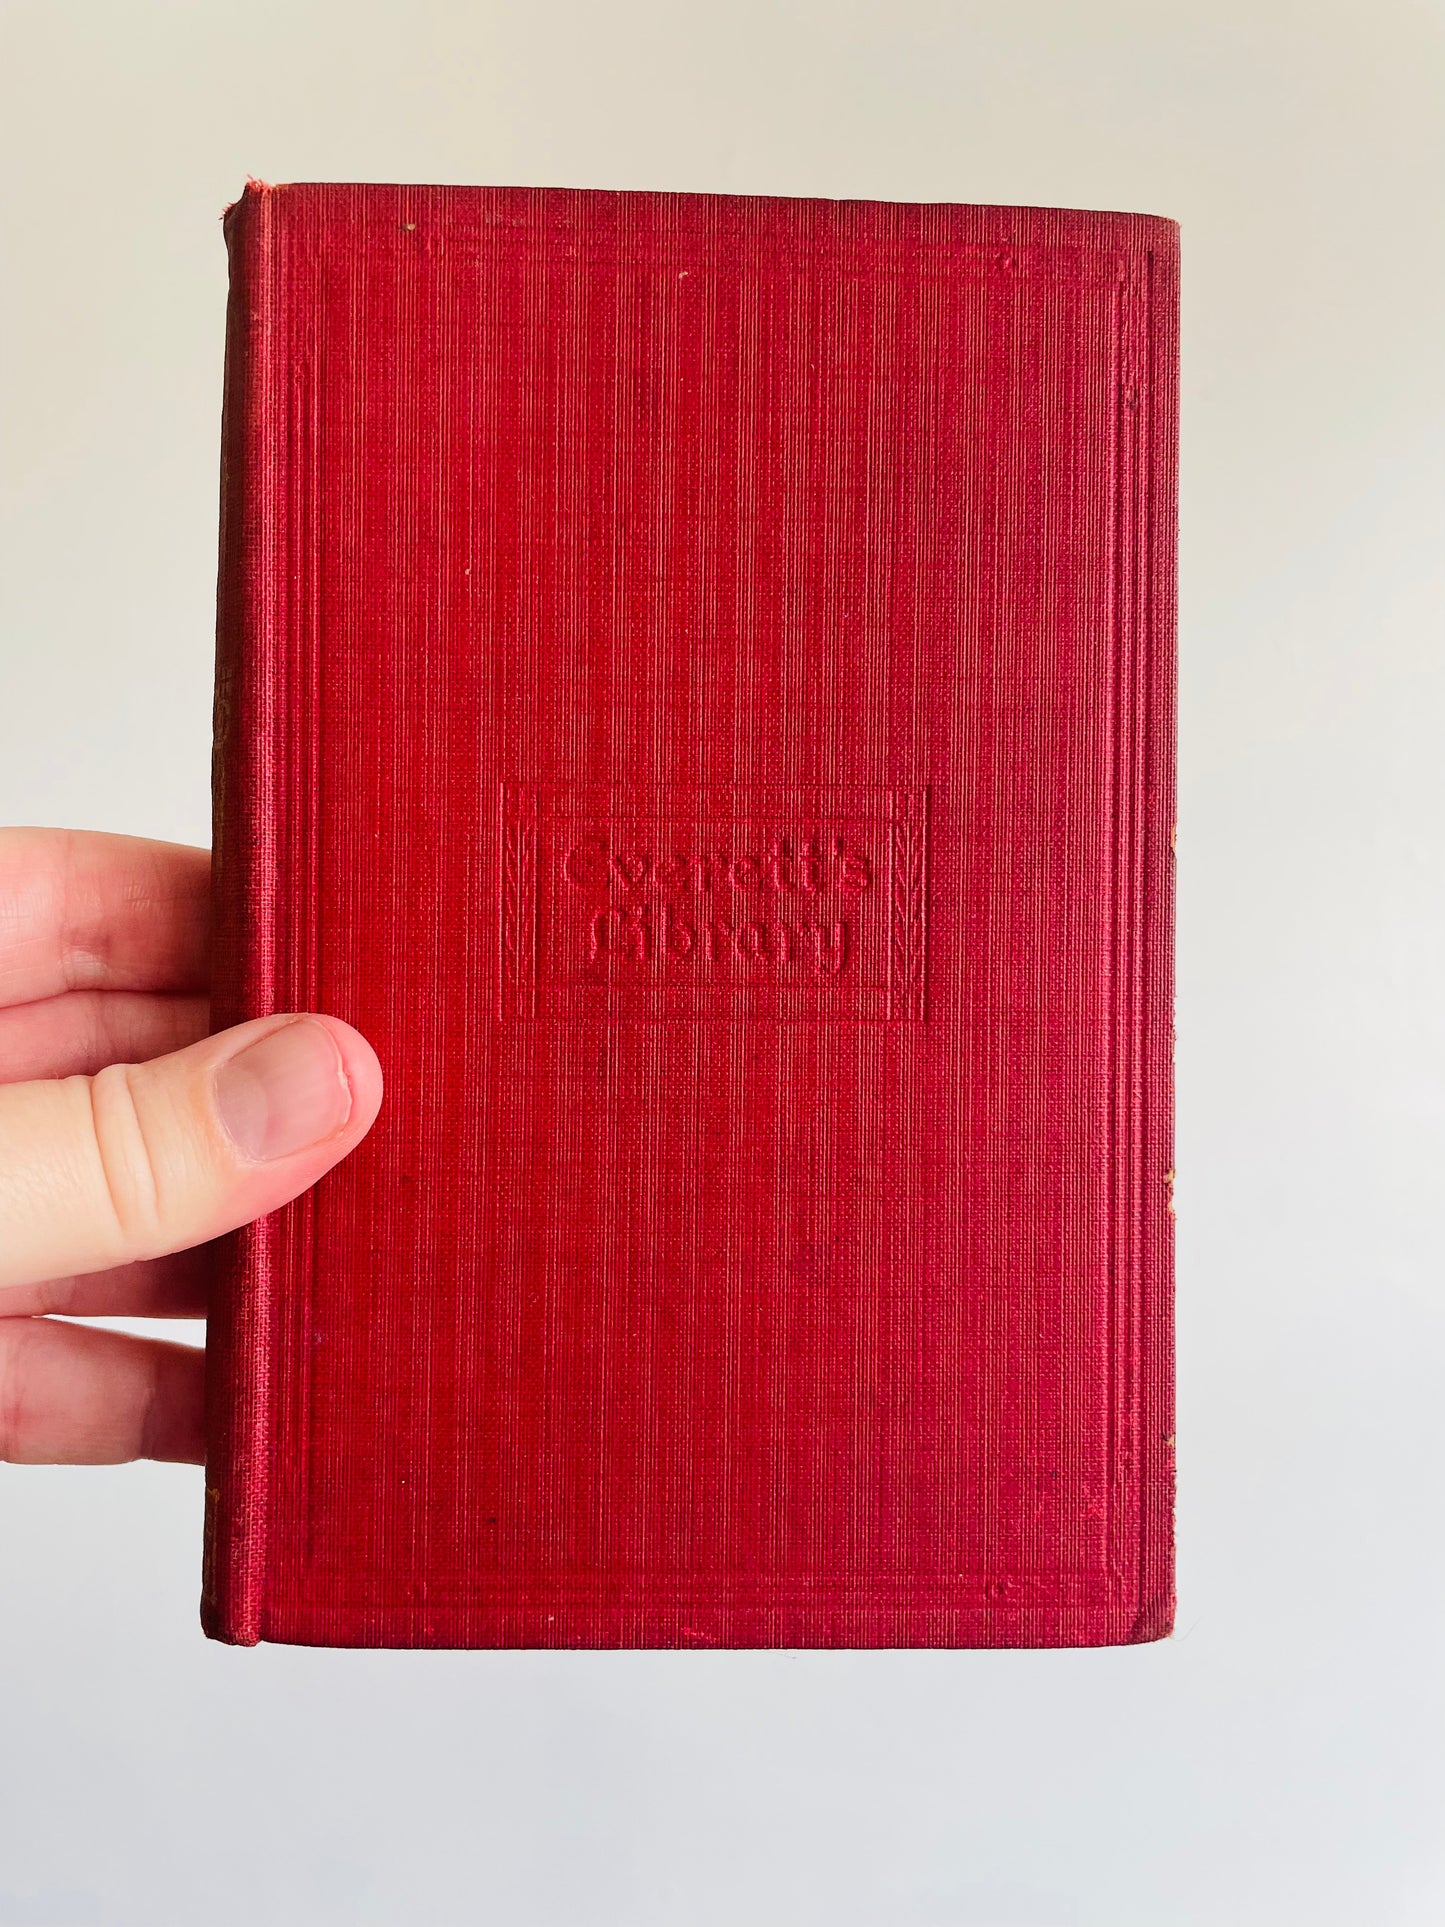 A Tramp Abroad by Mark Twain Hardcover Book - Everett's Library Edition